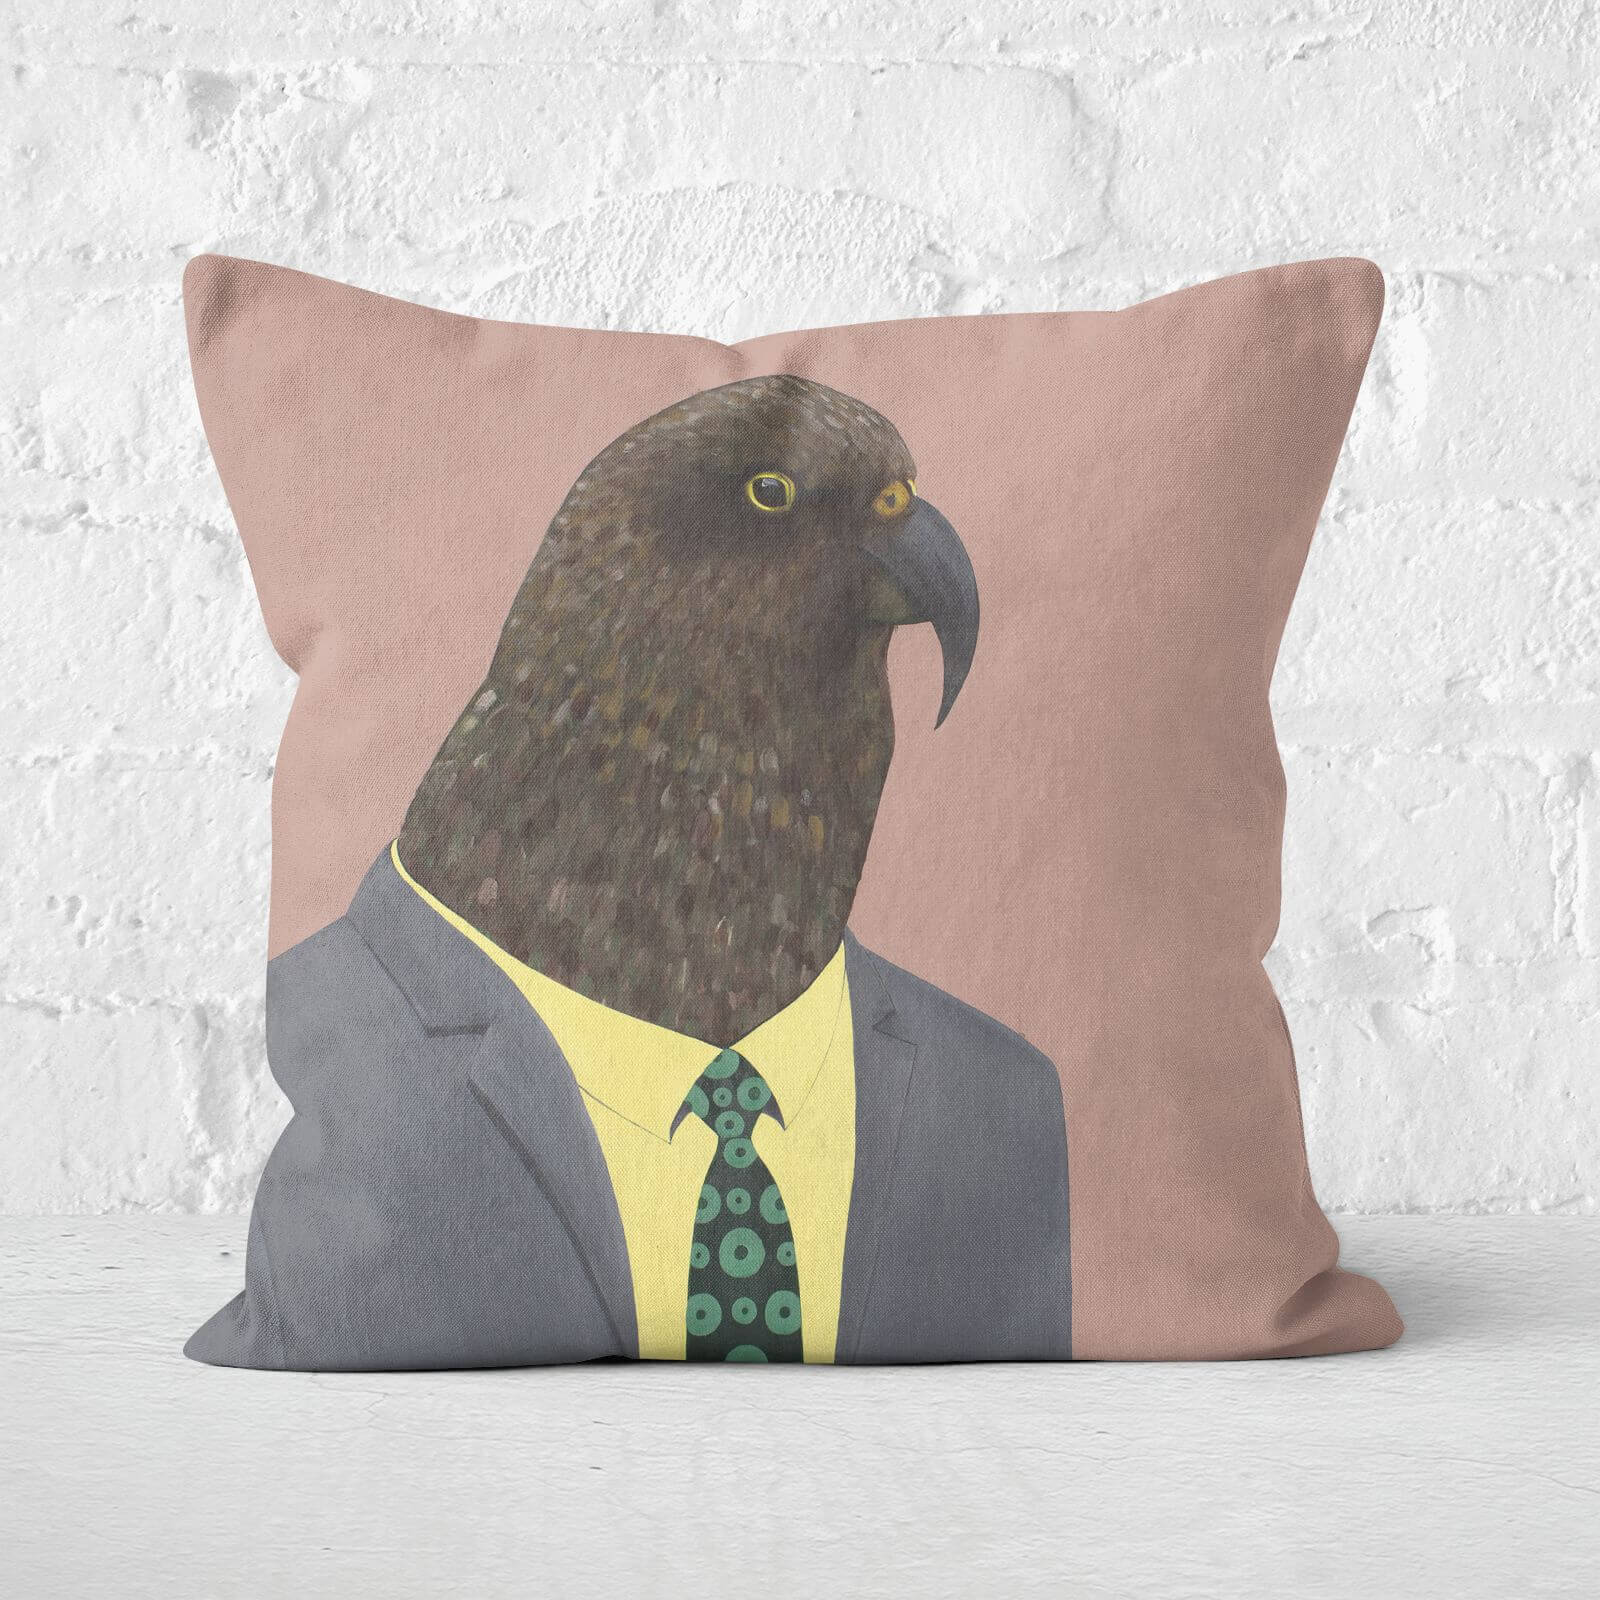 Kea In Suit Square Cushion - 40x40cm - Soft Touch